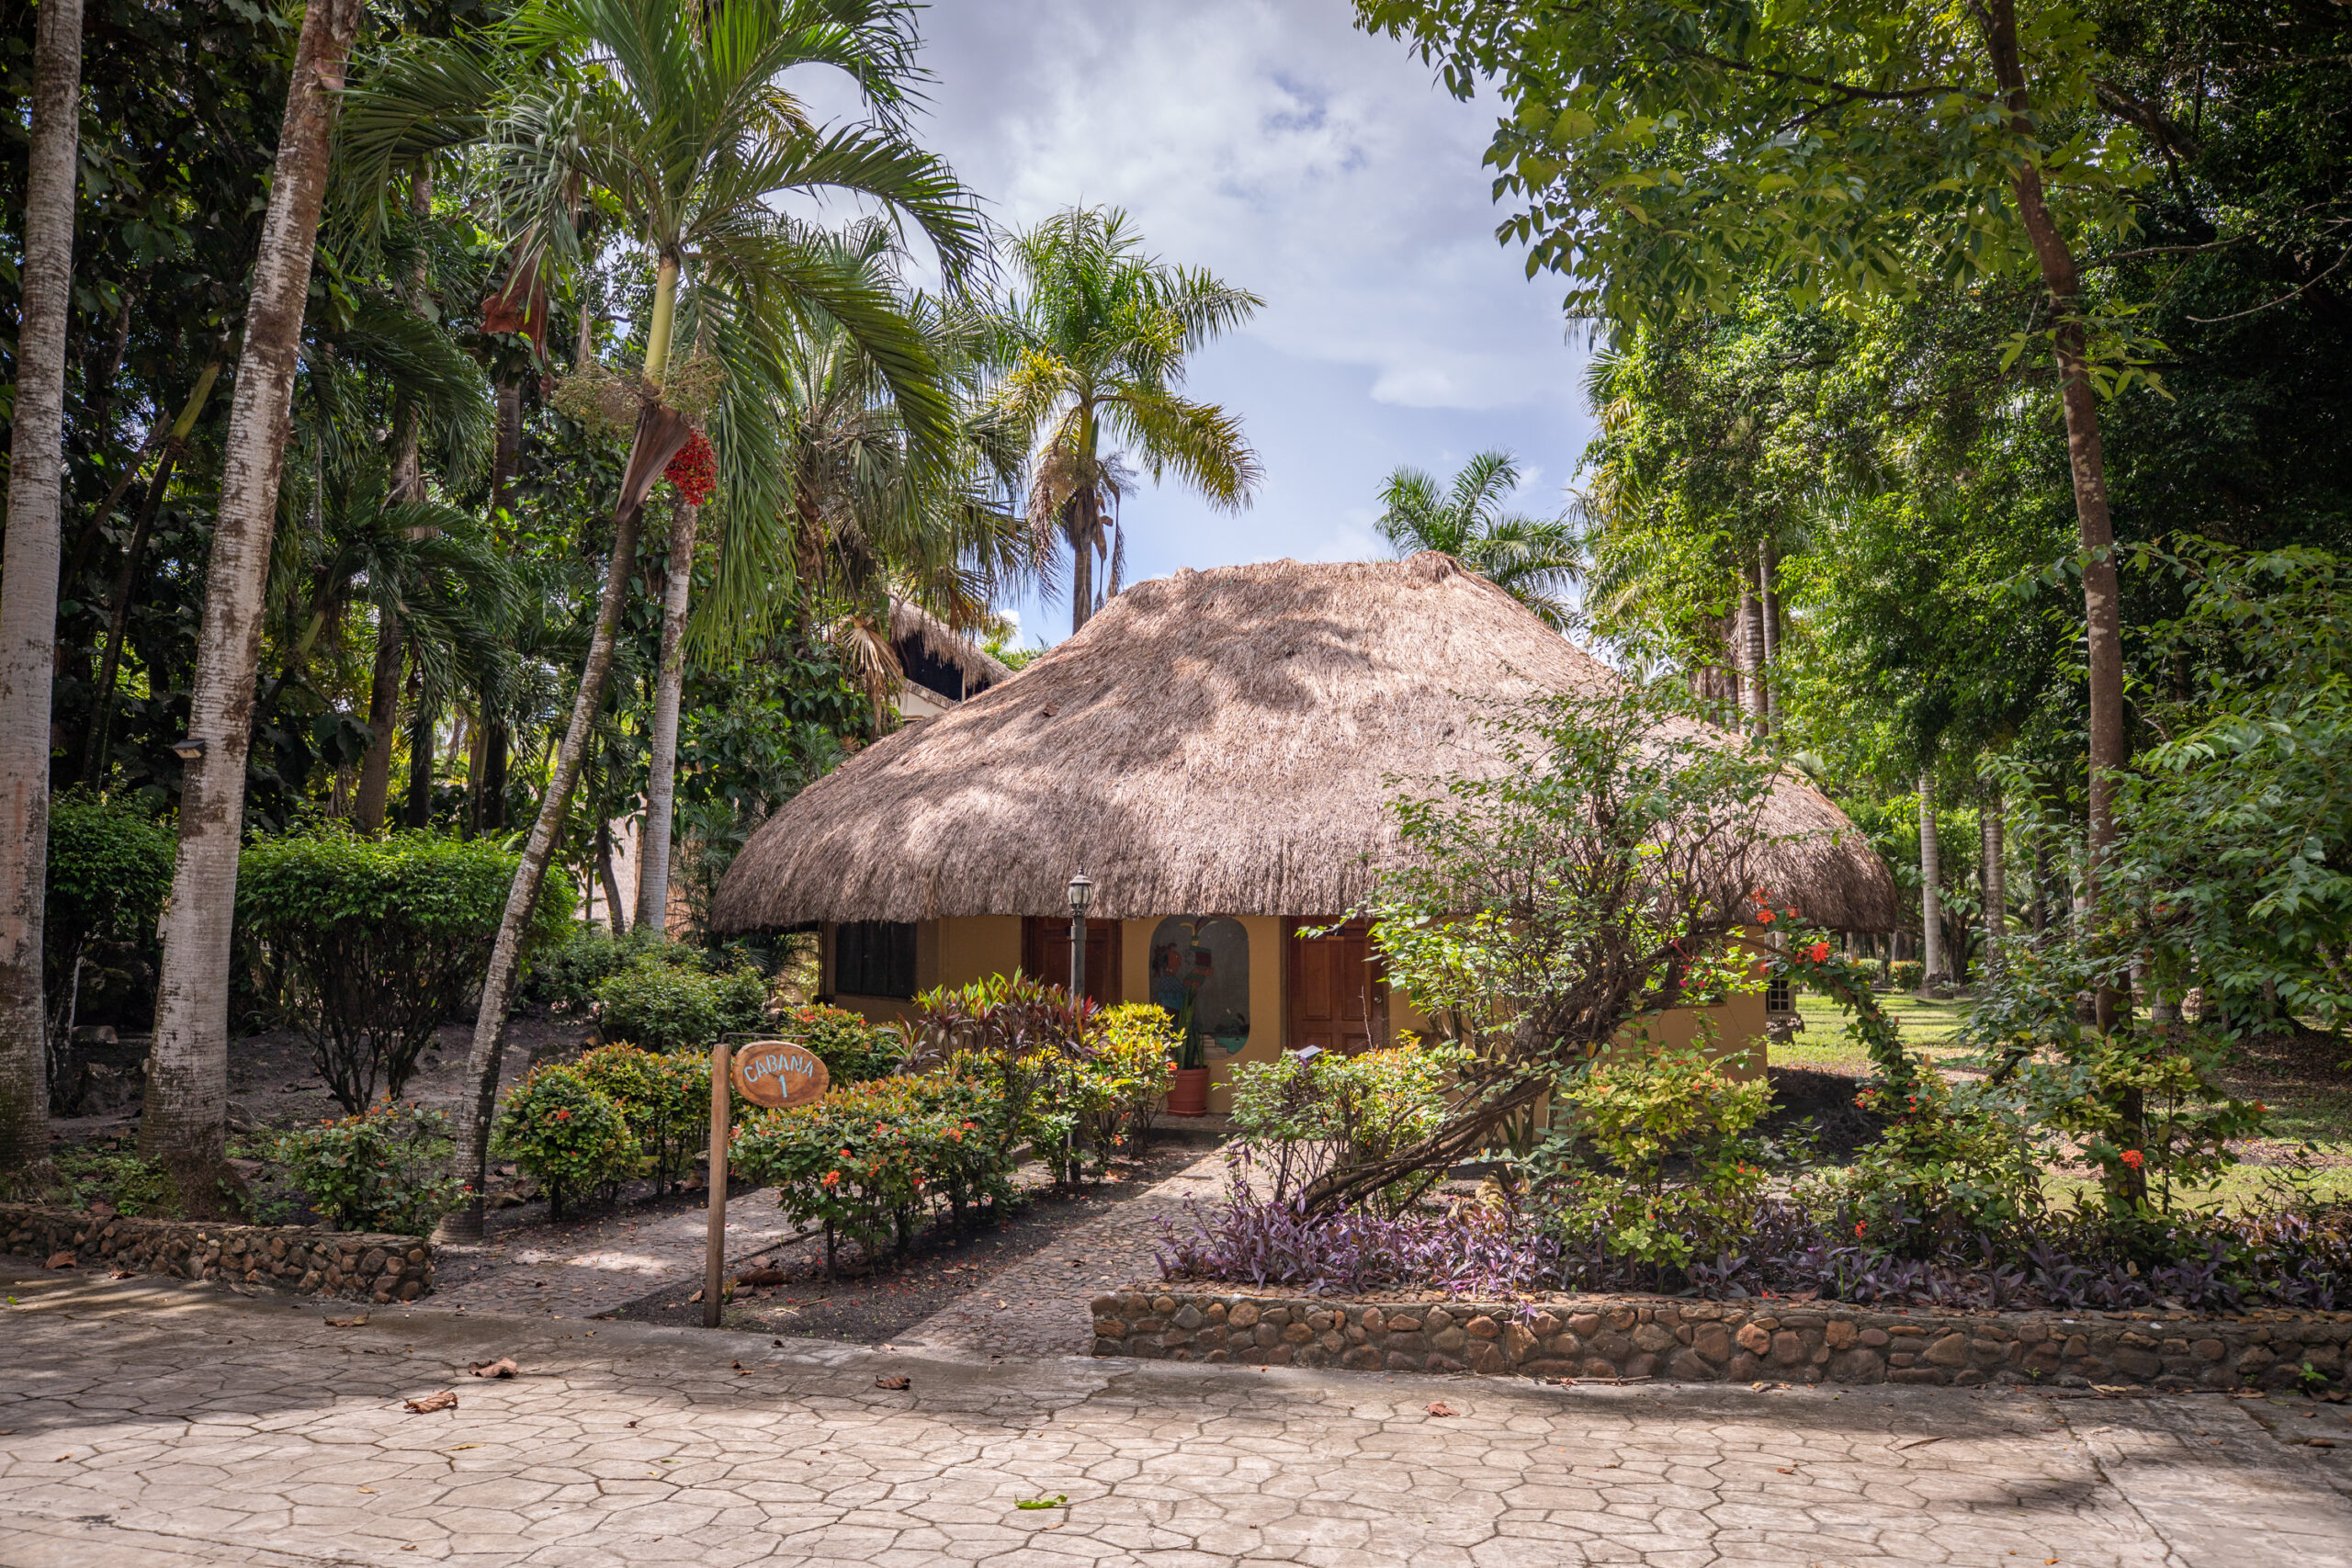 Top 10 Reasons You Should Retire in Belize